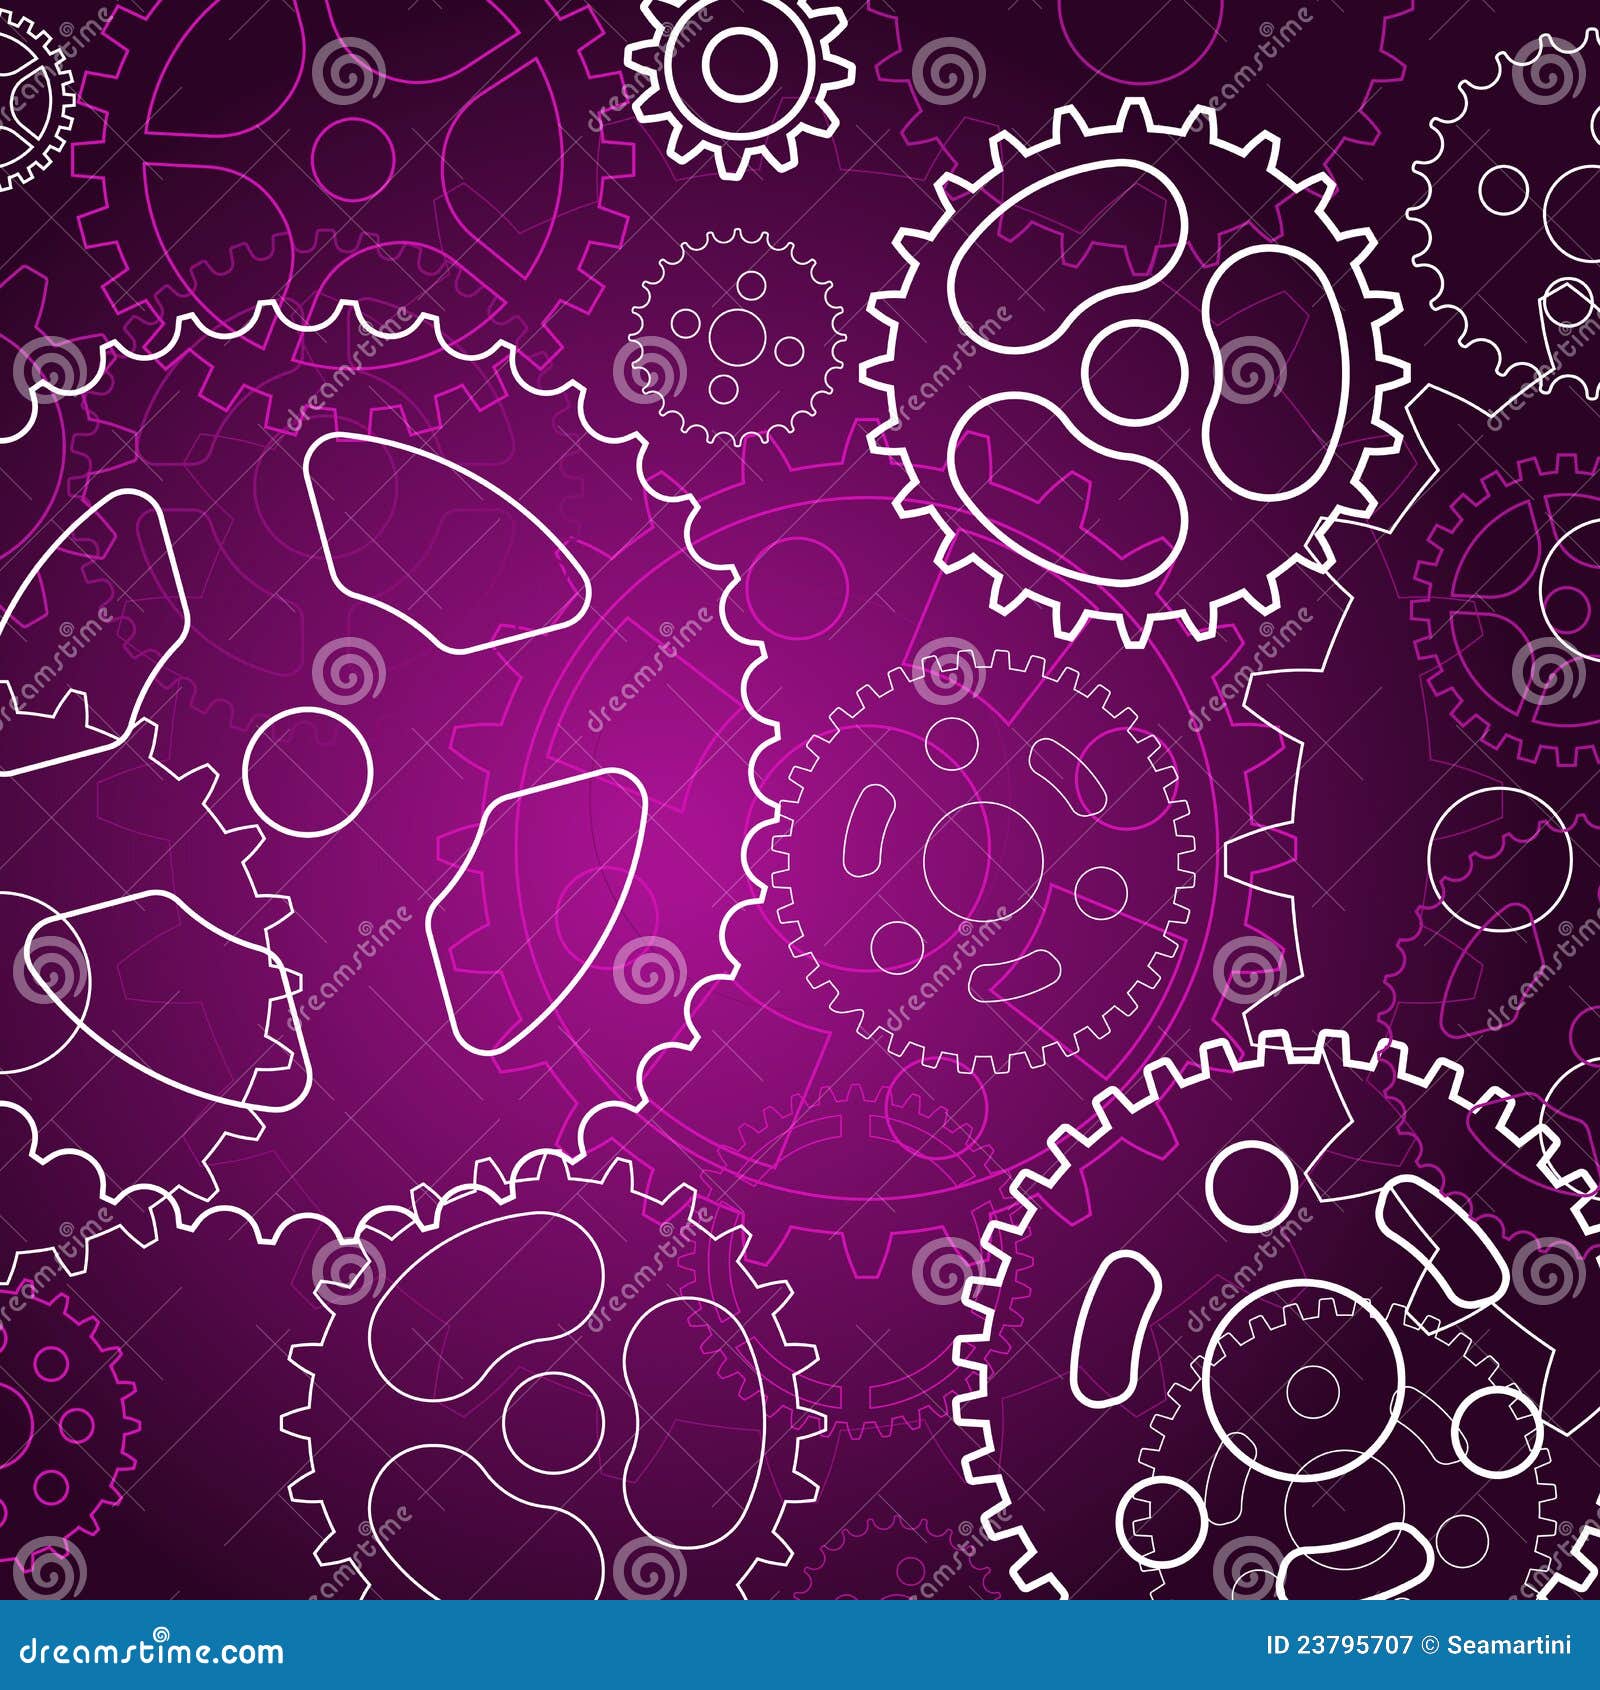 Abstract gear background stock vector. Illustration of gearing - 23795707